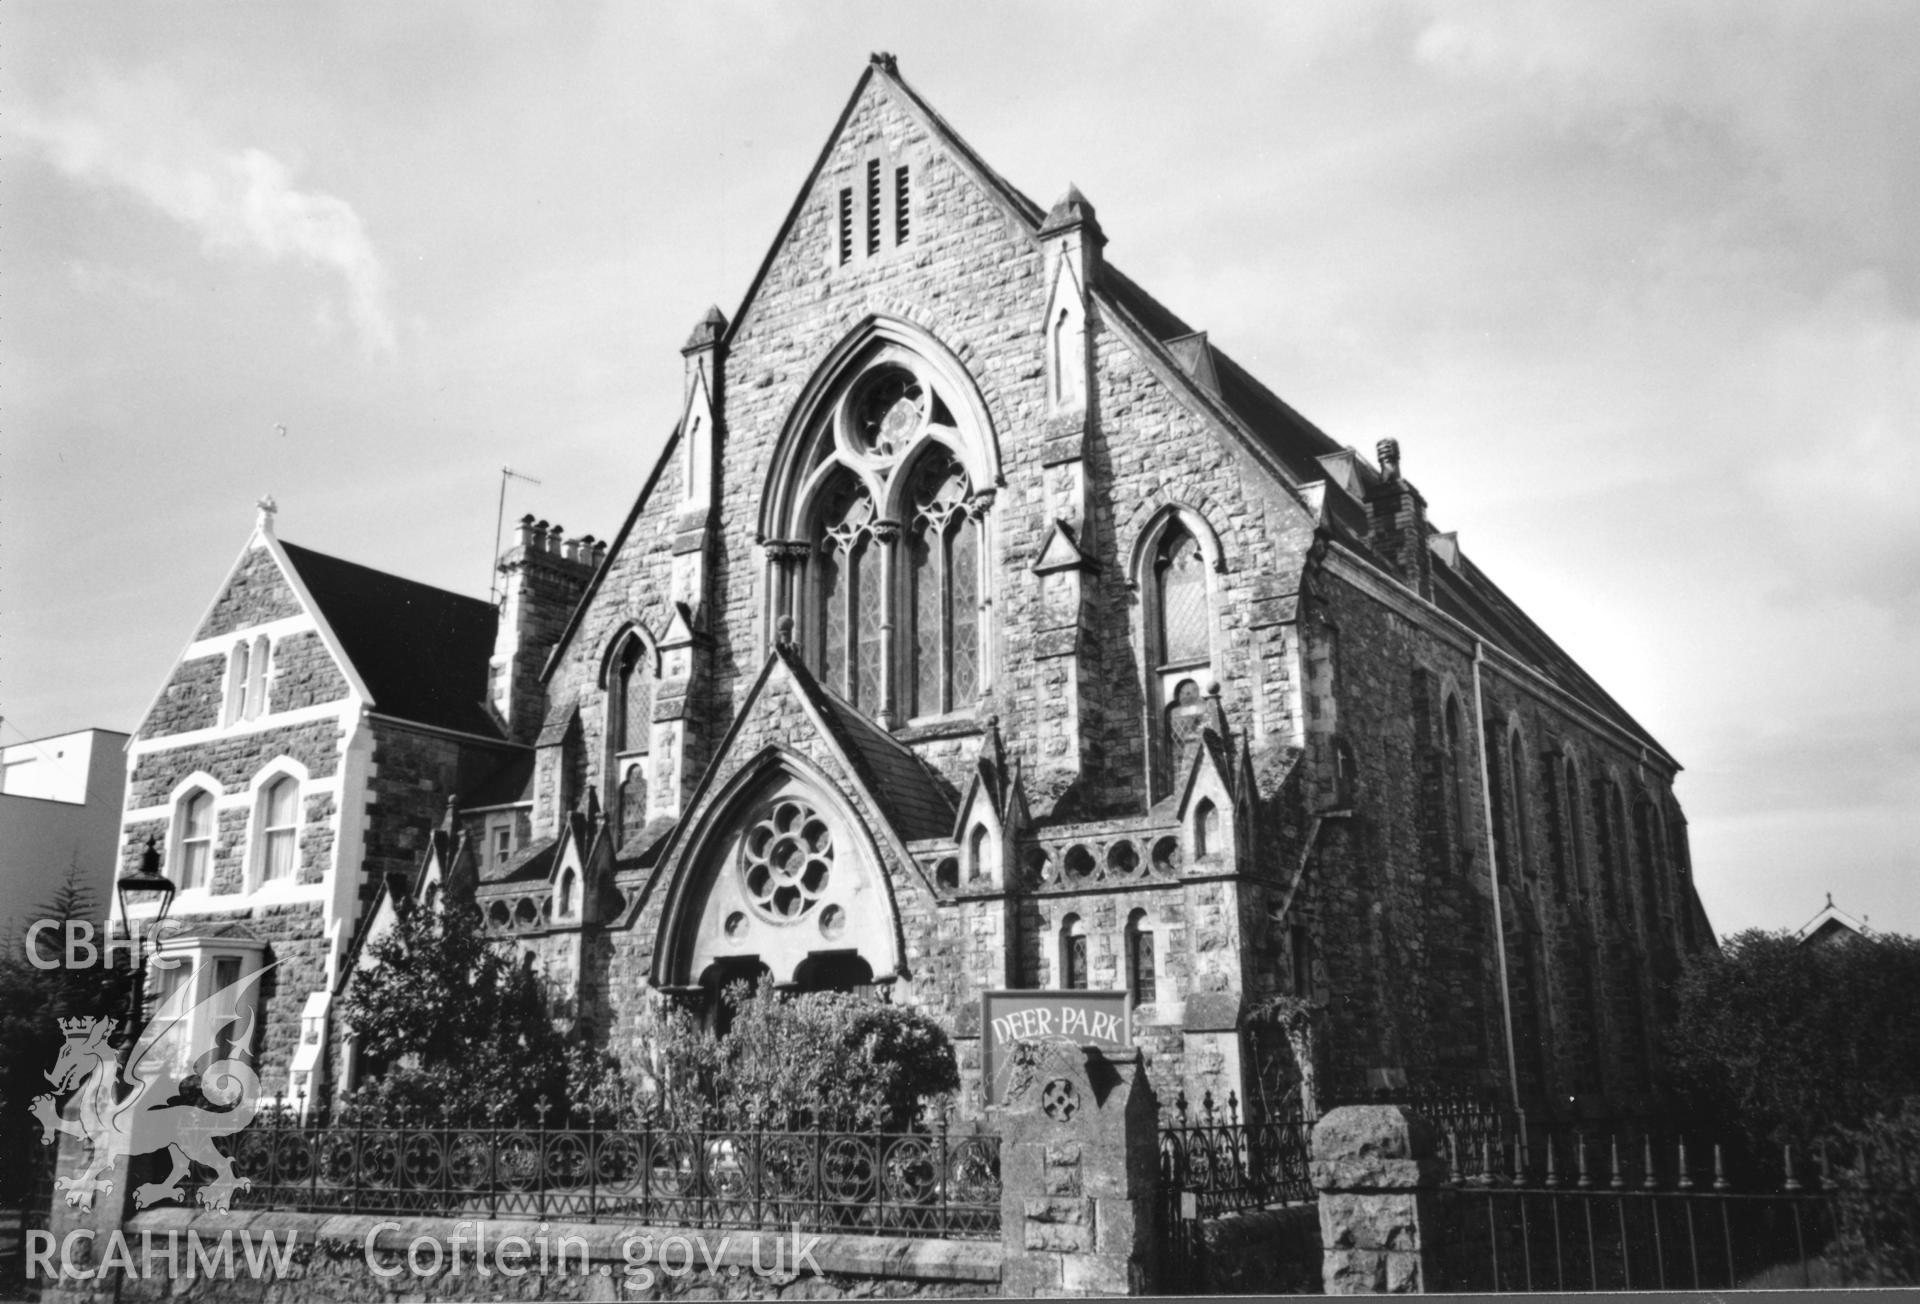 Digital copy of a black and white photograph showing exterior view of Deer Park English Baptist Chapel, Tenby,  taken by Robert Scourfield, 1996.